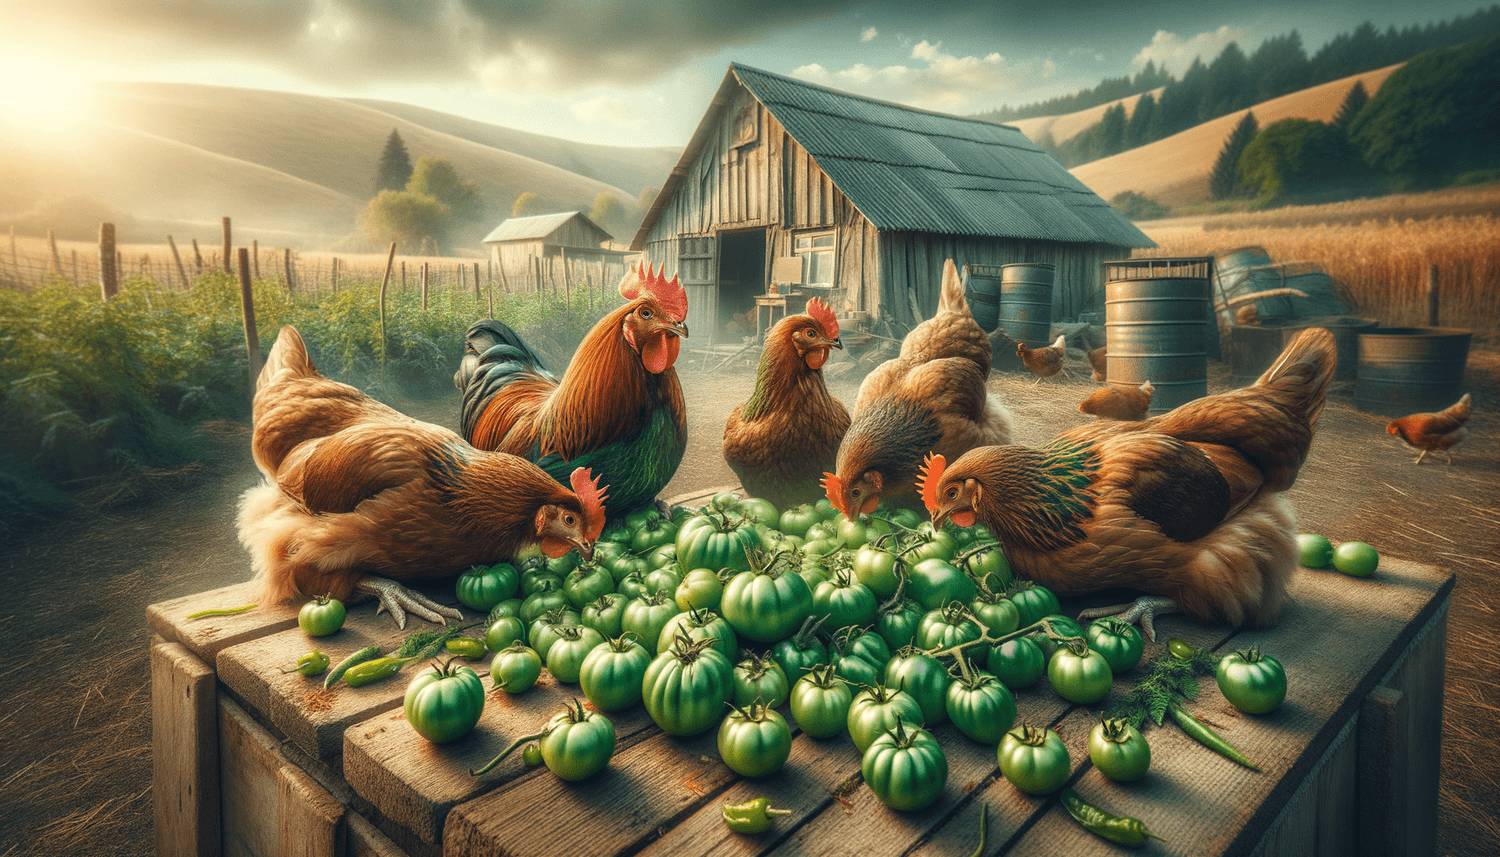 Can Chickens Eat Green Tomatoes?